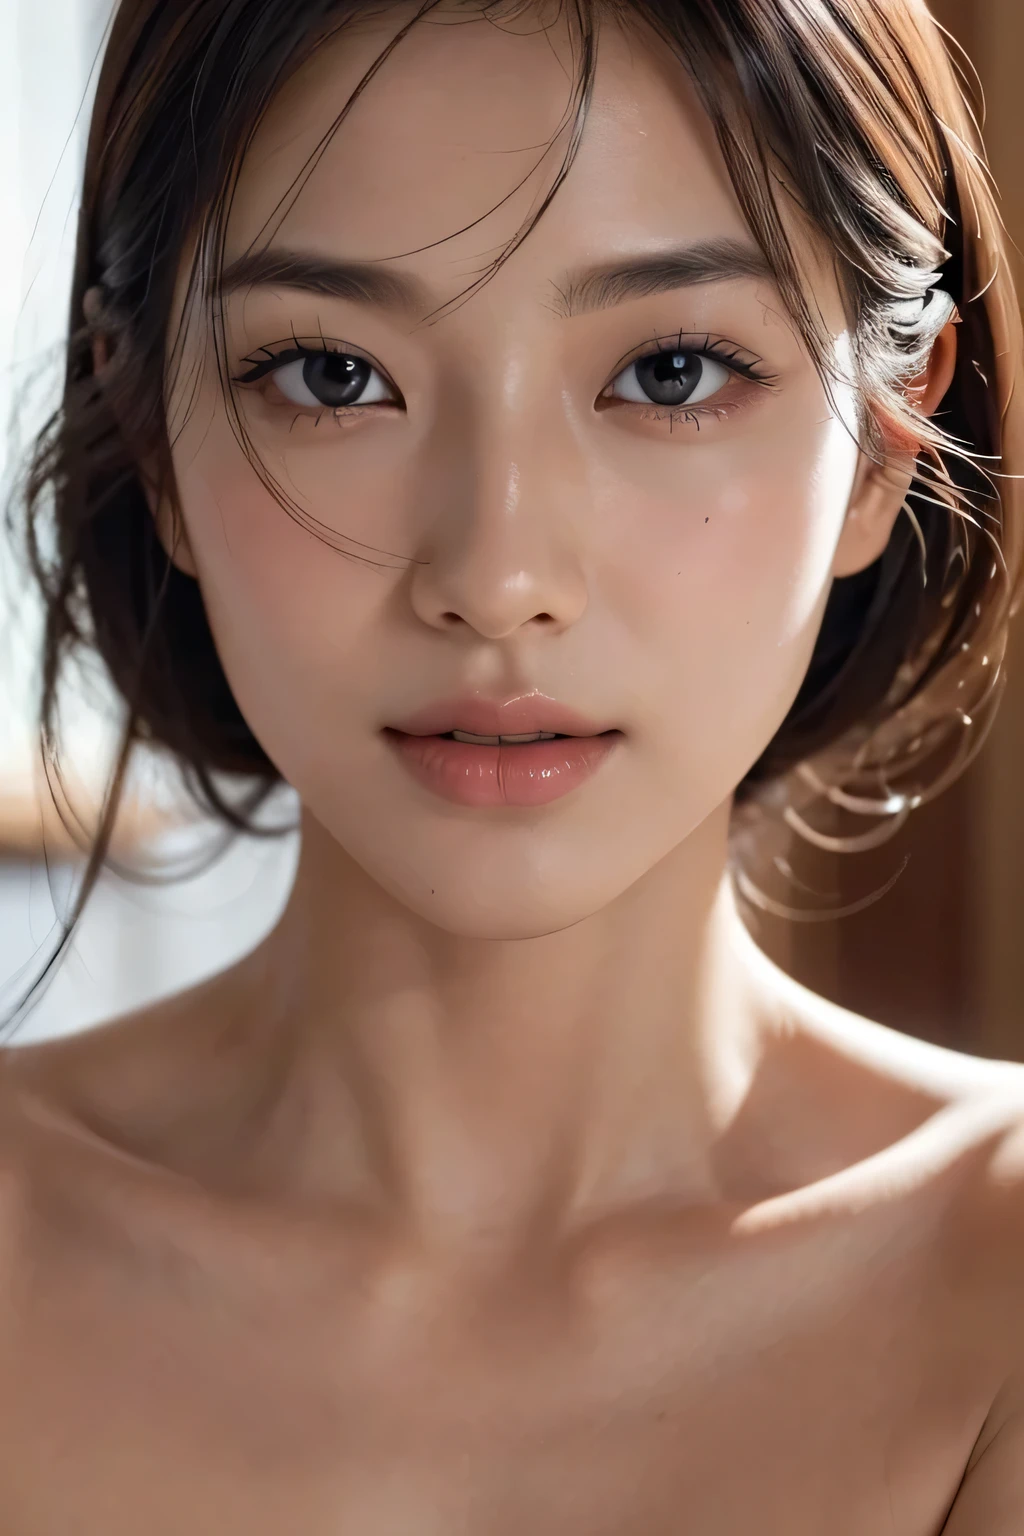 (Enhances the beauty of skin texture:1.1), (Enhances the beauty of skin texture:1.1), highest quality、masterpiece, ultra high resolution、(Photoreal:1.4)、RAW photo、1 girl、shiny skin, dramatic lighting, RAW photo, table top:1.3, ultra high resolution:1.0, sharp focus:1.2, beautiful woman with perfect figure:1.4, thin abs:1.2, Highly detailed face and skin texture, fine eyes, double eyelid, perfect facial balance, clean system, smile, Soft light in a beautiful studio, rim light, vivid details, surreal, Fine and beautiful skin, realistic skin, beautiful face, Beautiful woman, high solution face, soft texture, nude, close up of face, glowing skin, face of glory, crazy high resolution, glowing skin, shining face, luster, oily skin, oily face, close up of face, zoom on face, oily skin, oily face, 強いluster, beautiful hair, Kitagawa Keiko、Kuroki Meisa, whitening